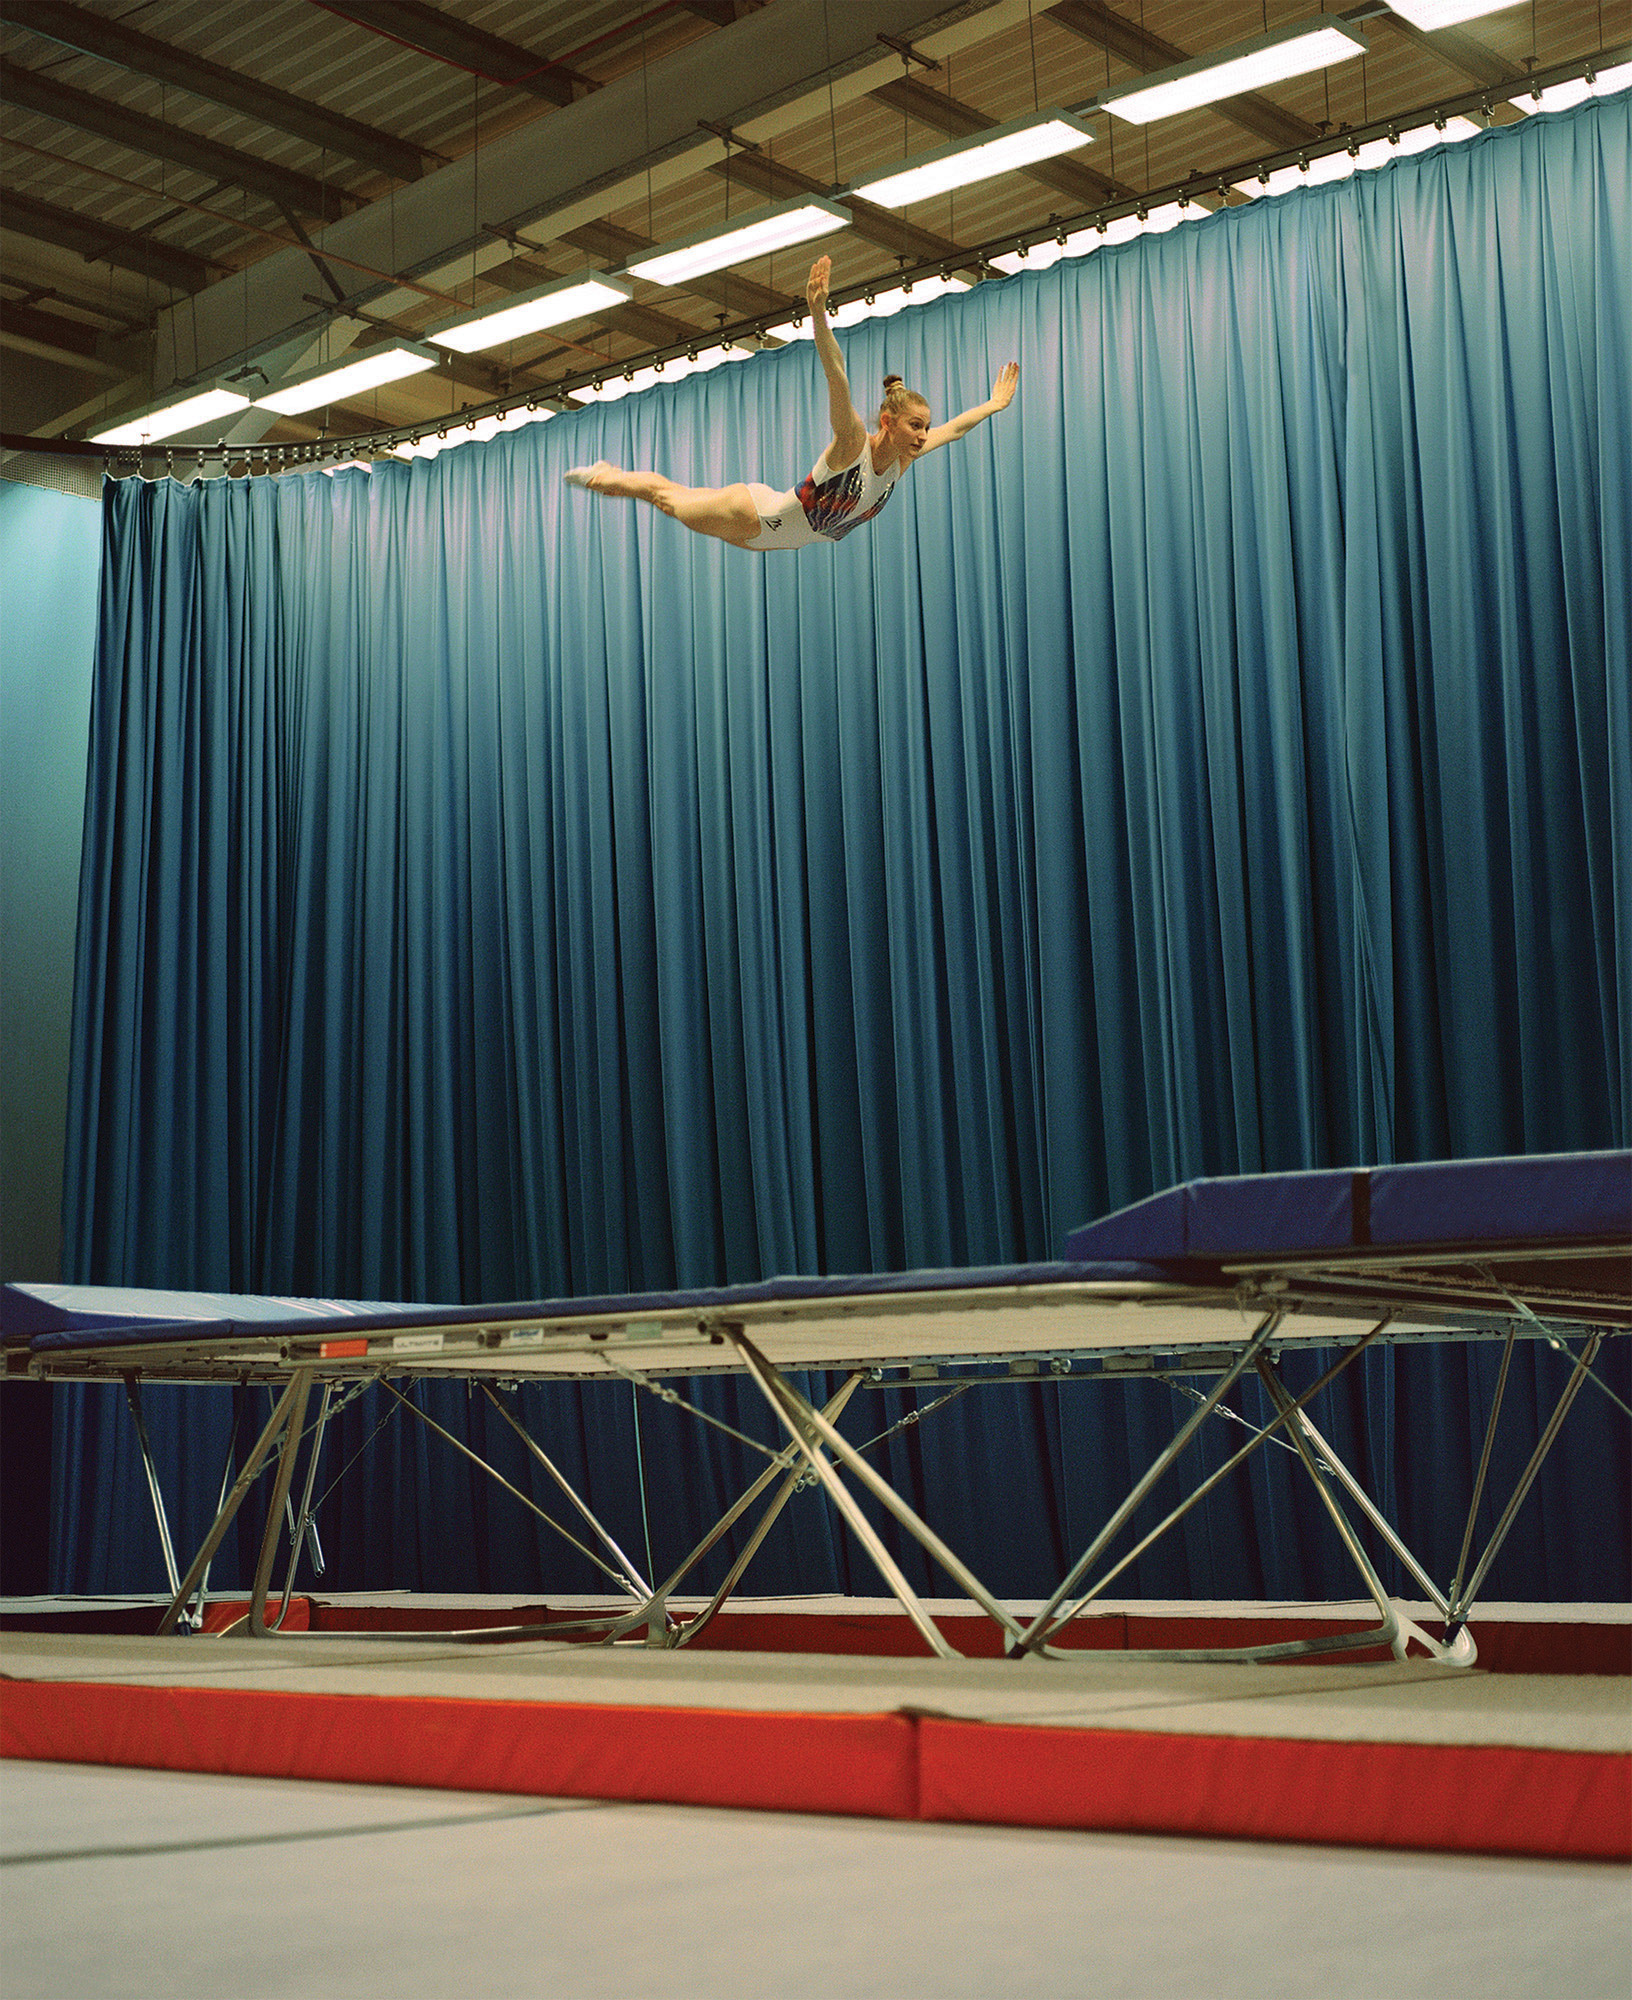 glorious rachel louise brown bryony page trampolinist training